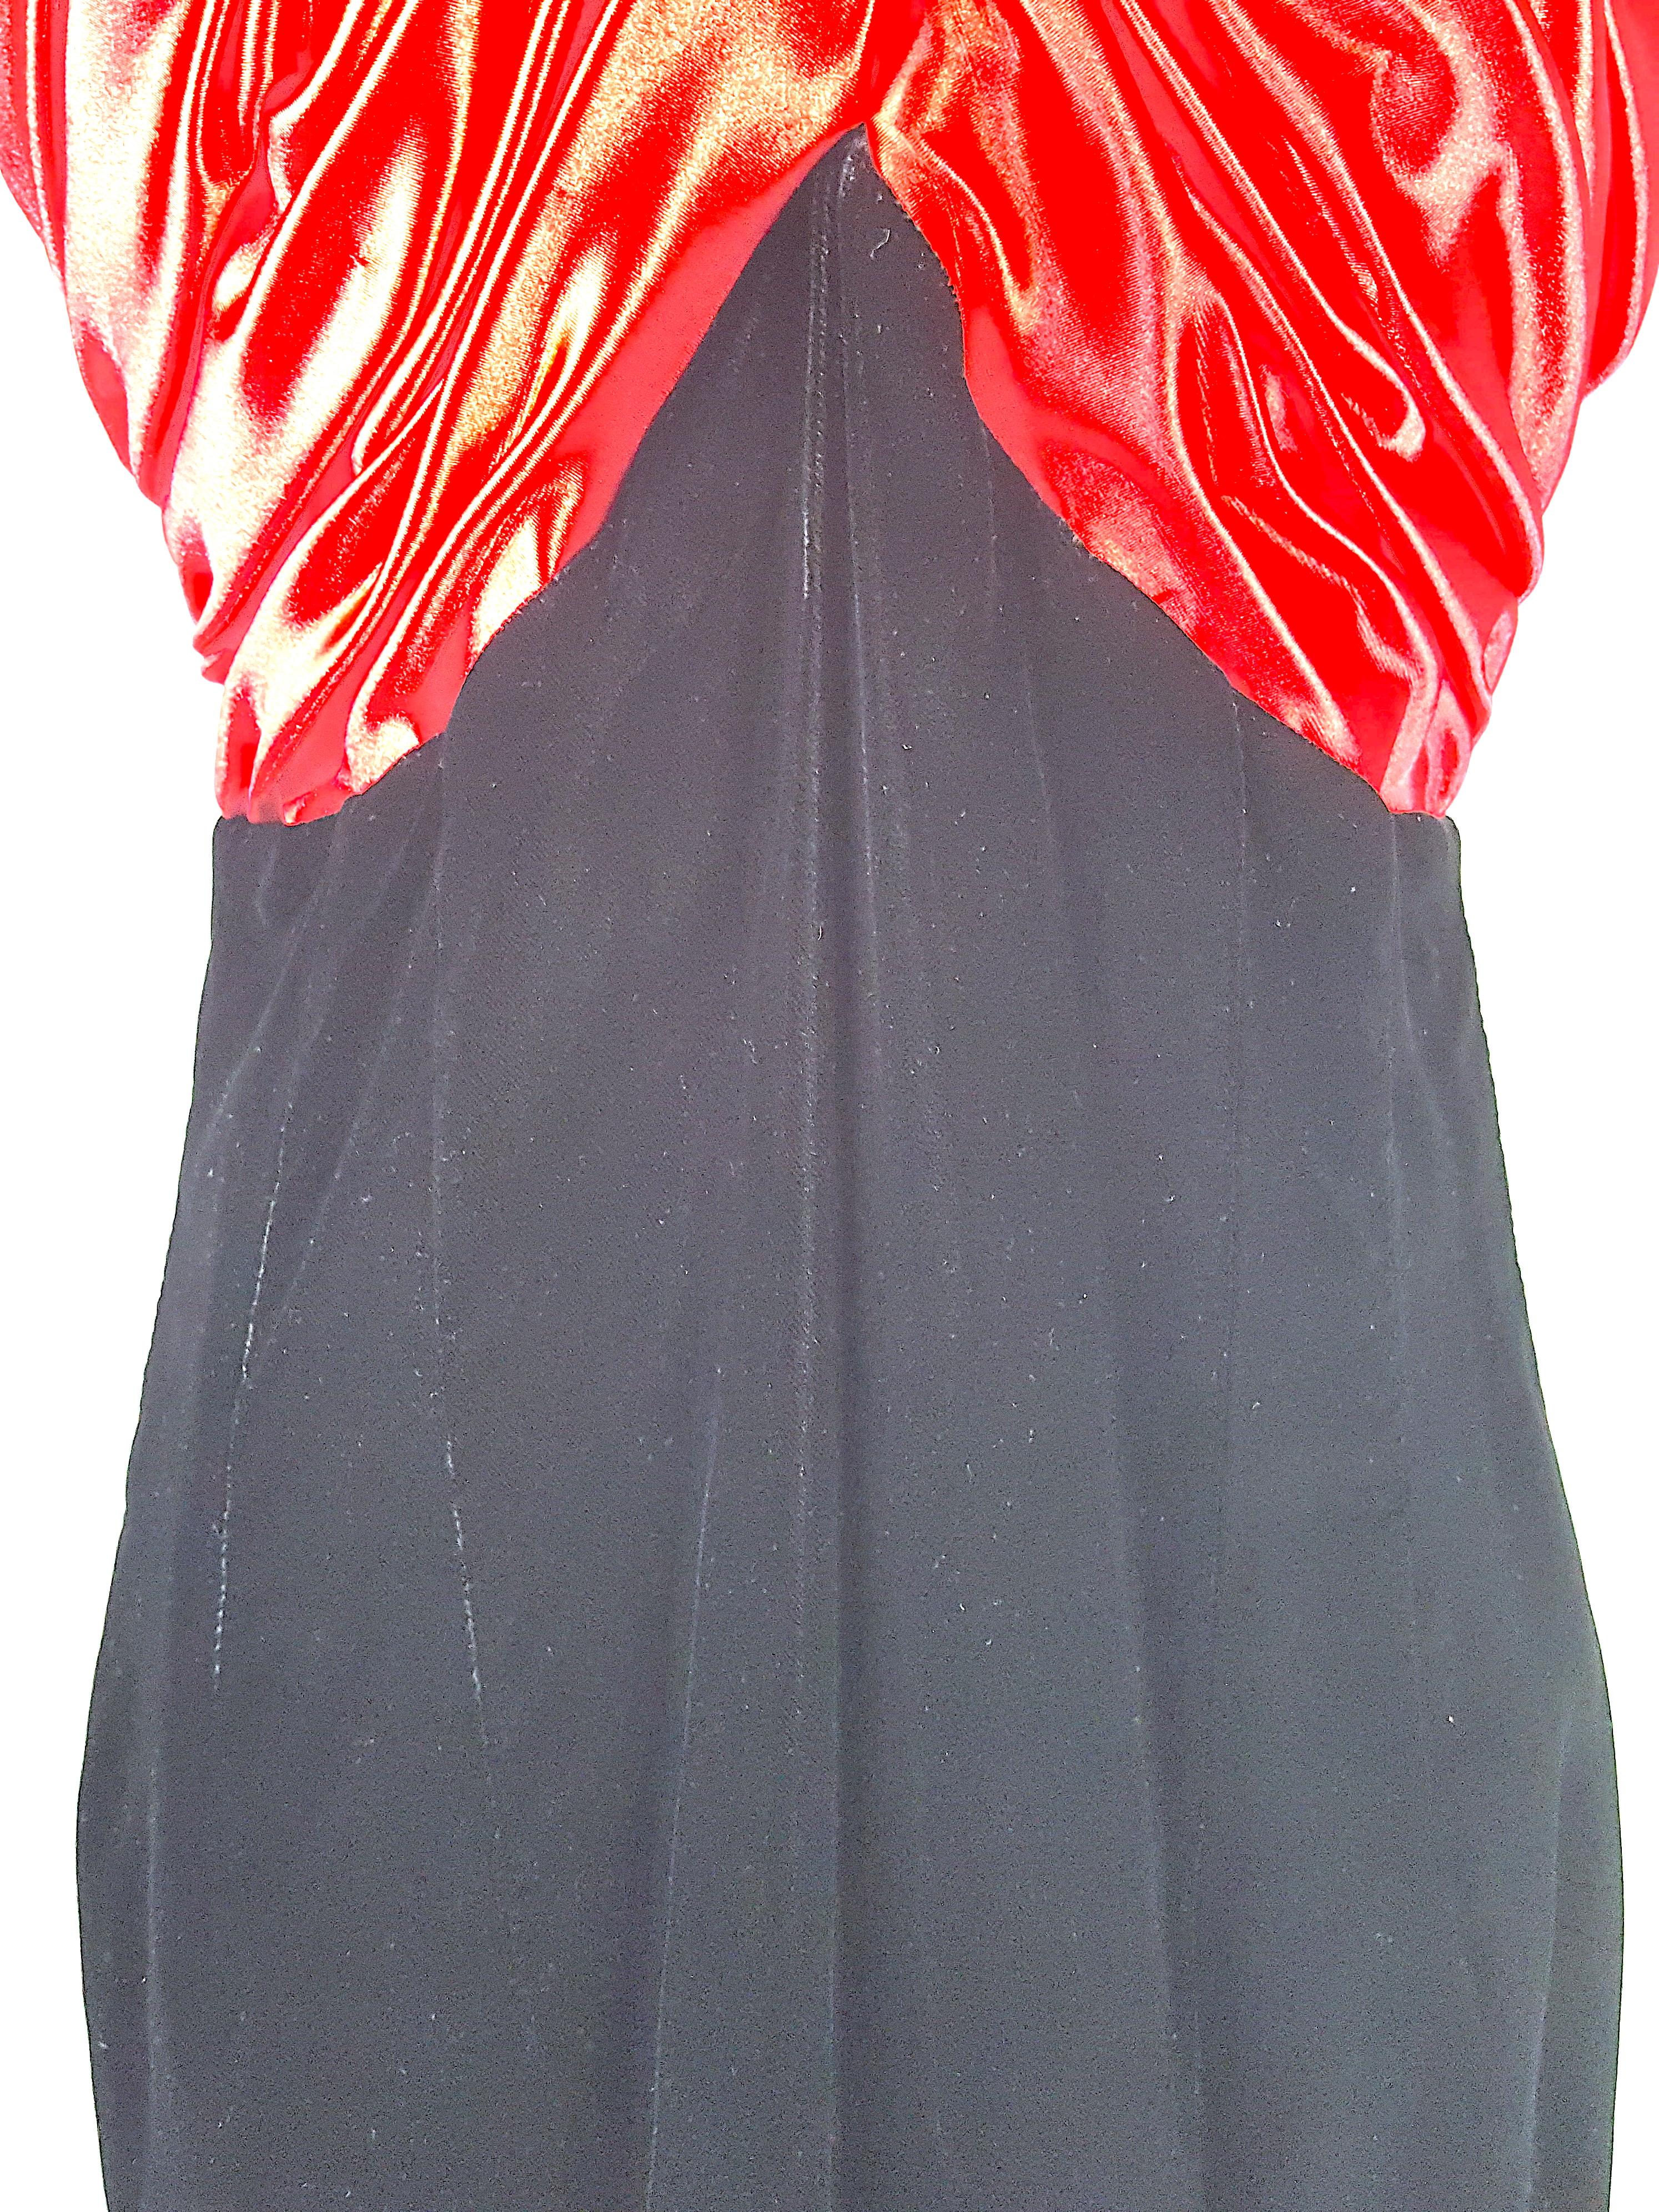 1980s VictorCosta GatheredRuched RedSatin BlackVelvet LongSlit Formal Maxi Gown In Excellent Condition For Sale In Chicago, IL